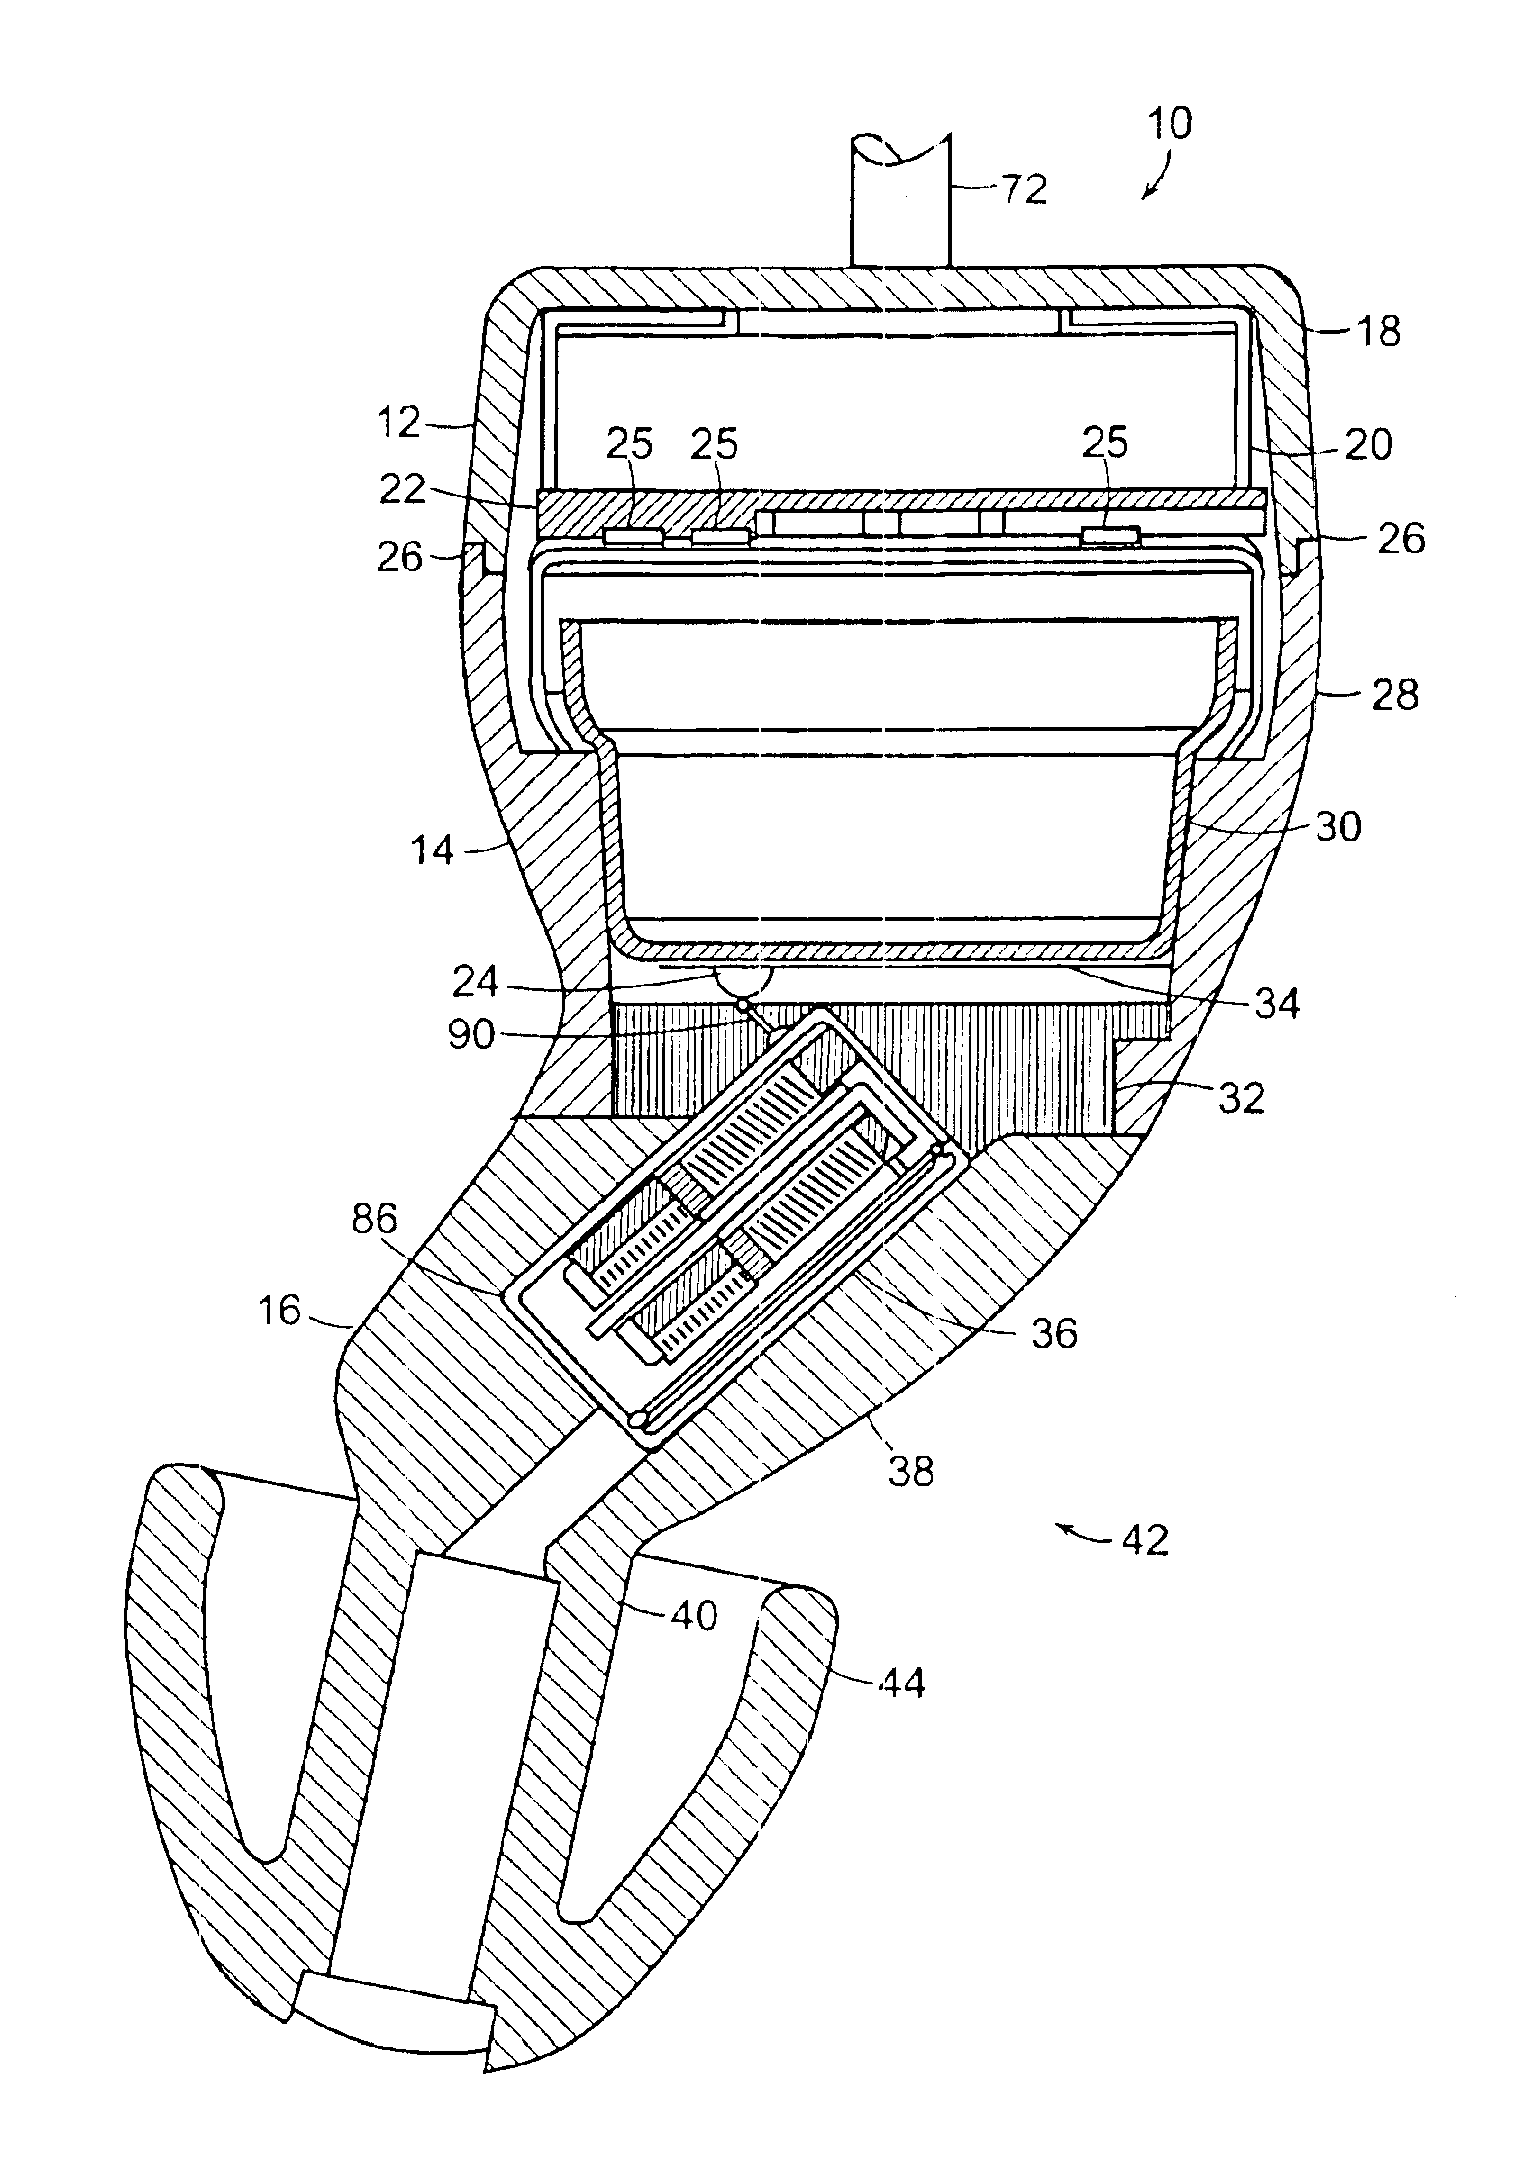 Hearing aid with a flexible shell